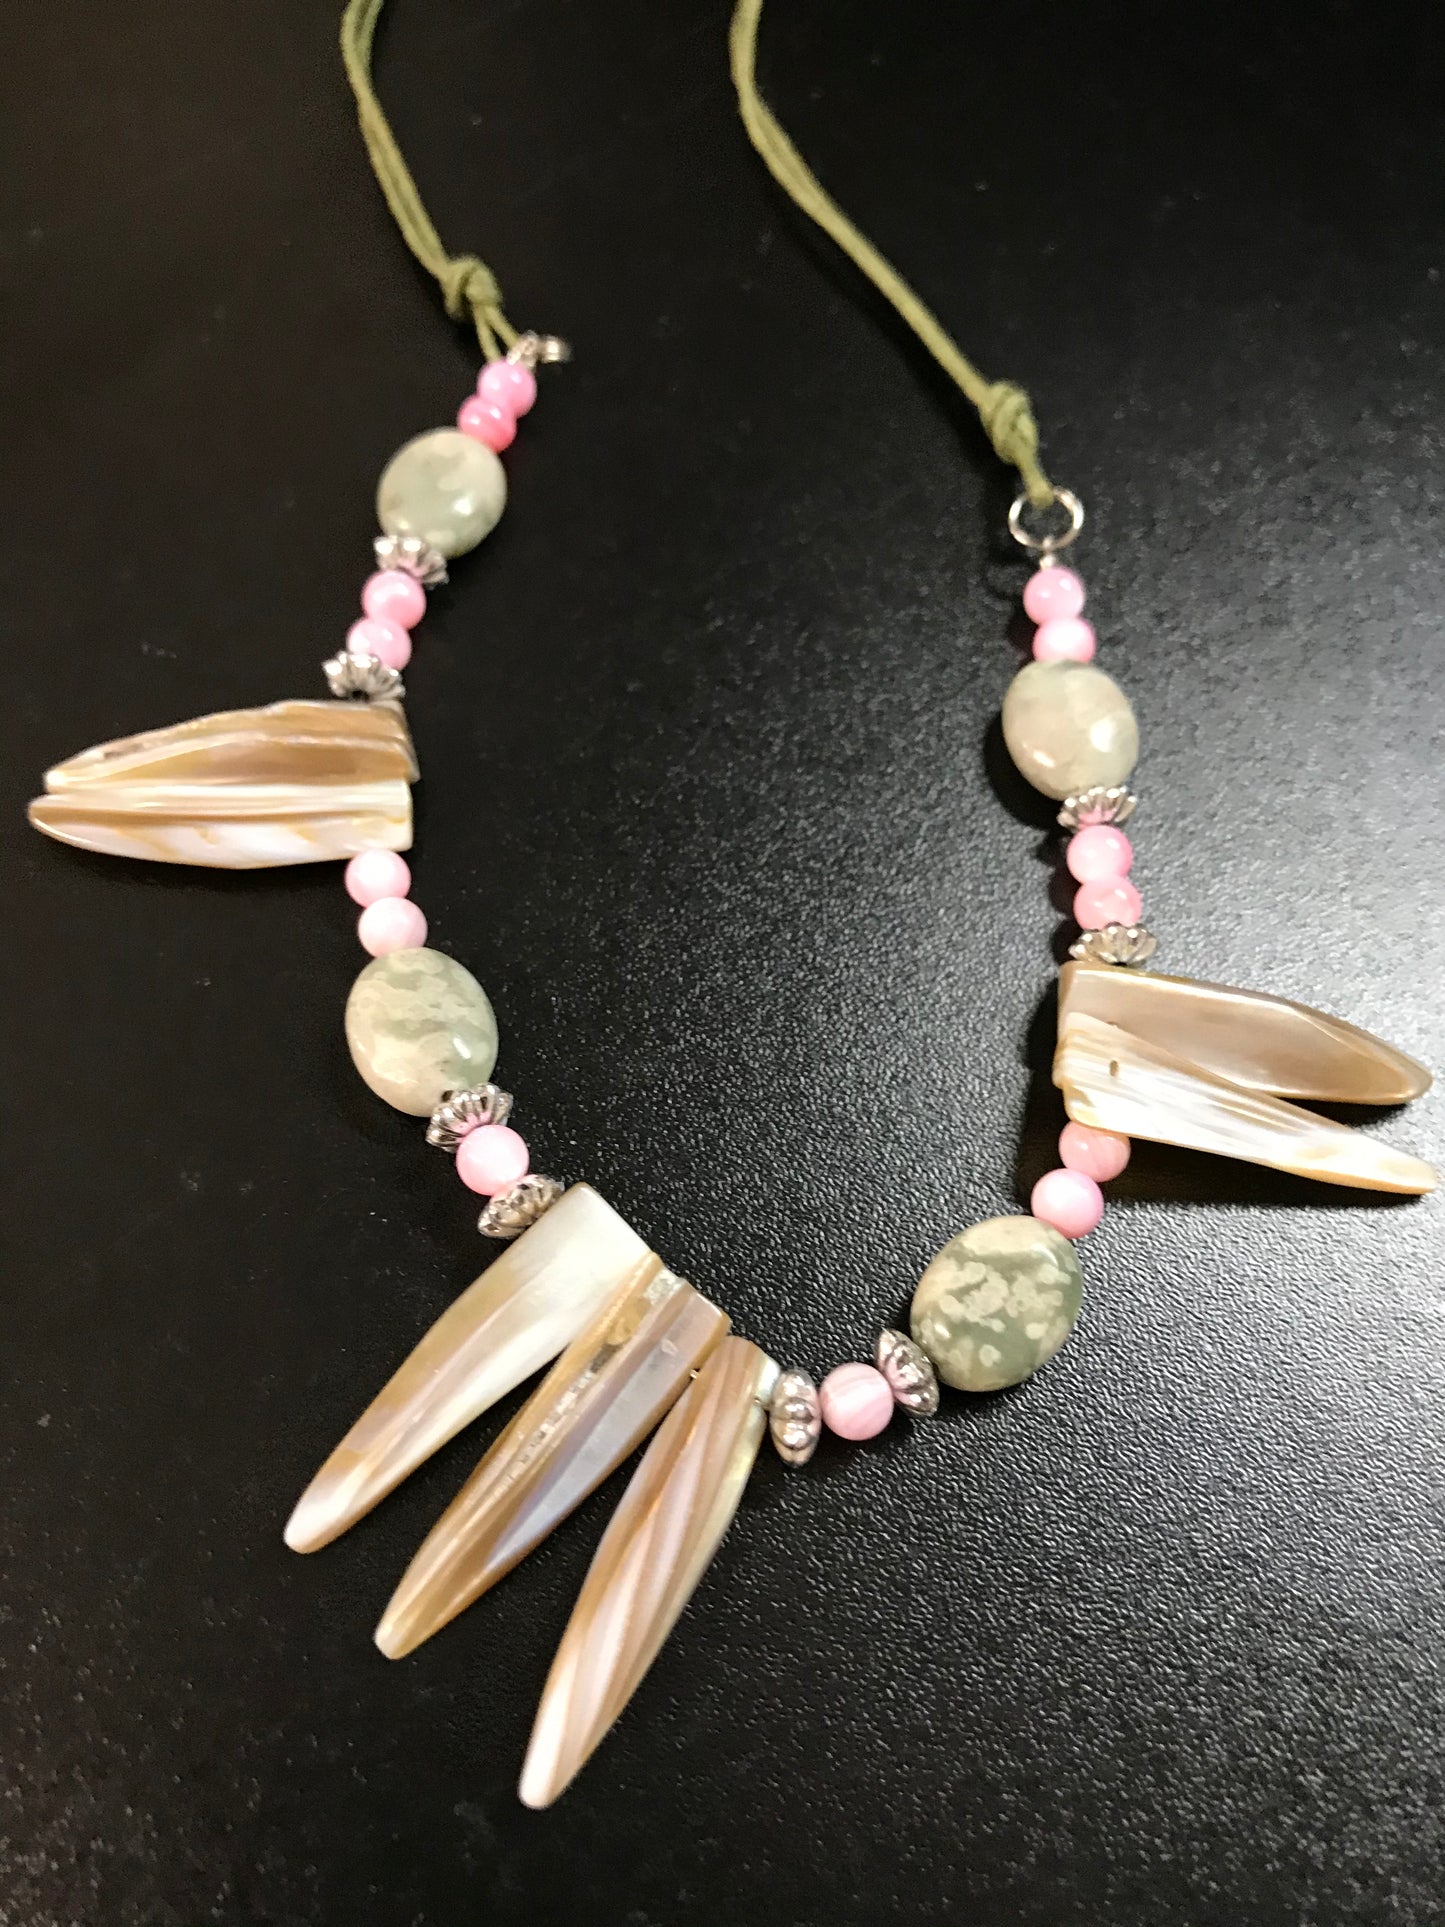 19 1/4" Beaded Necklace with Mother Of Pearl Focals